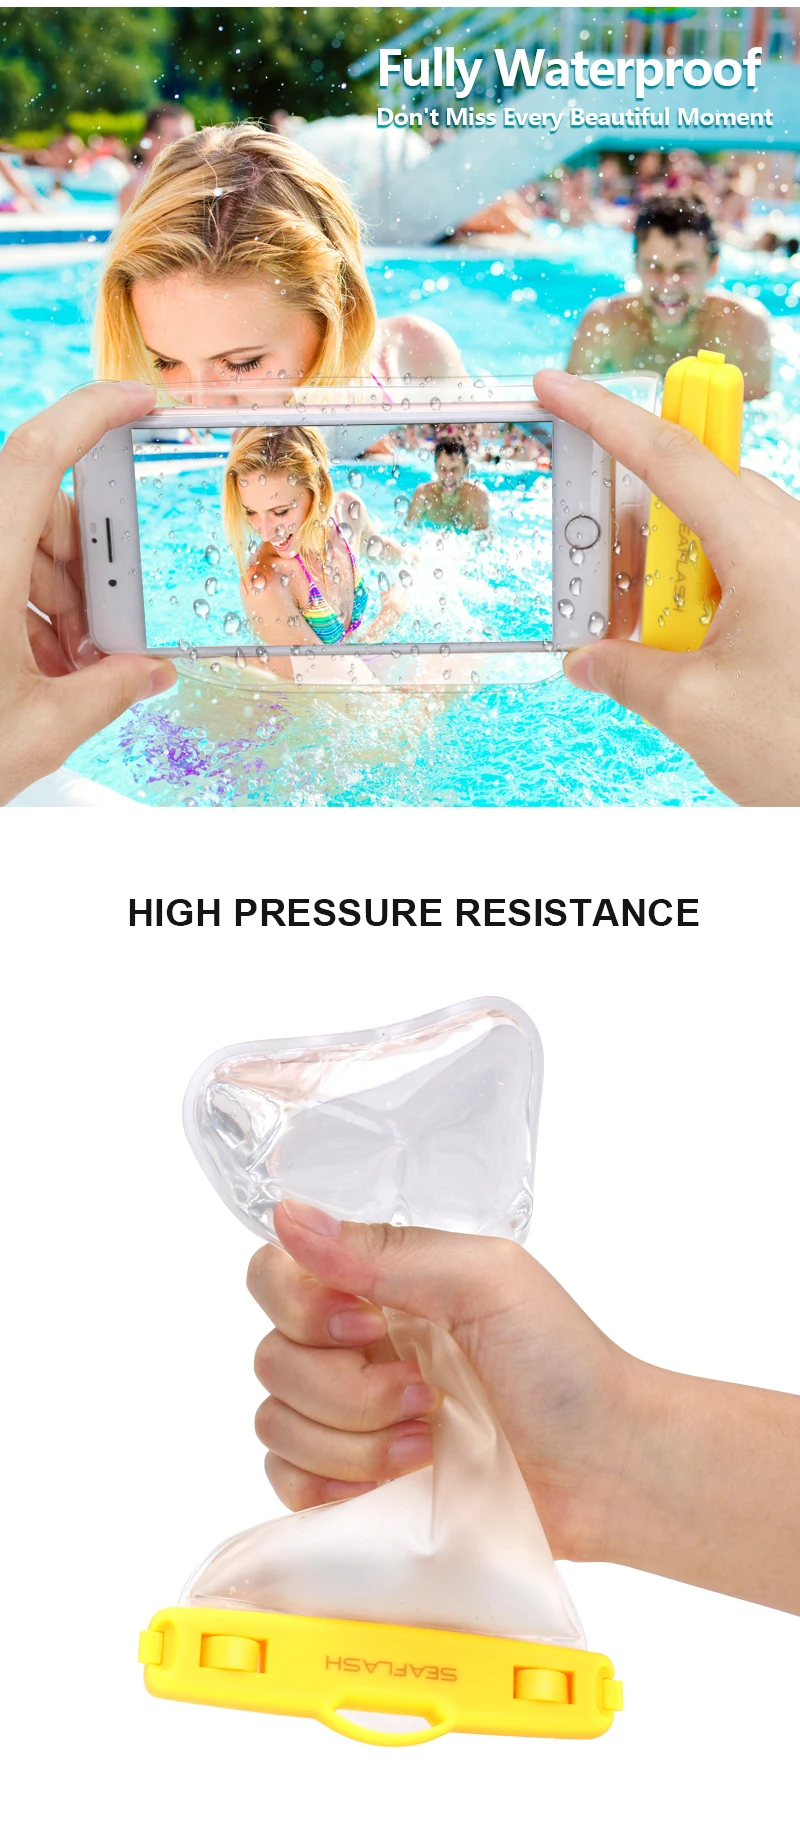 2021 New Design Waterproof Bag for Mobile Phone Wholesale Outdoor TPU Waterproof Phone Pouch Clear Phone Case